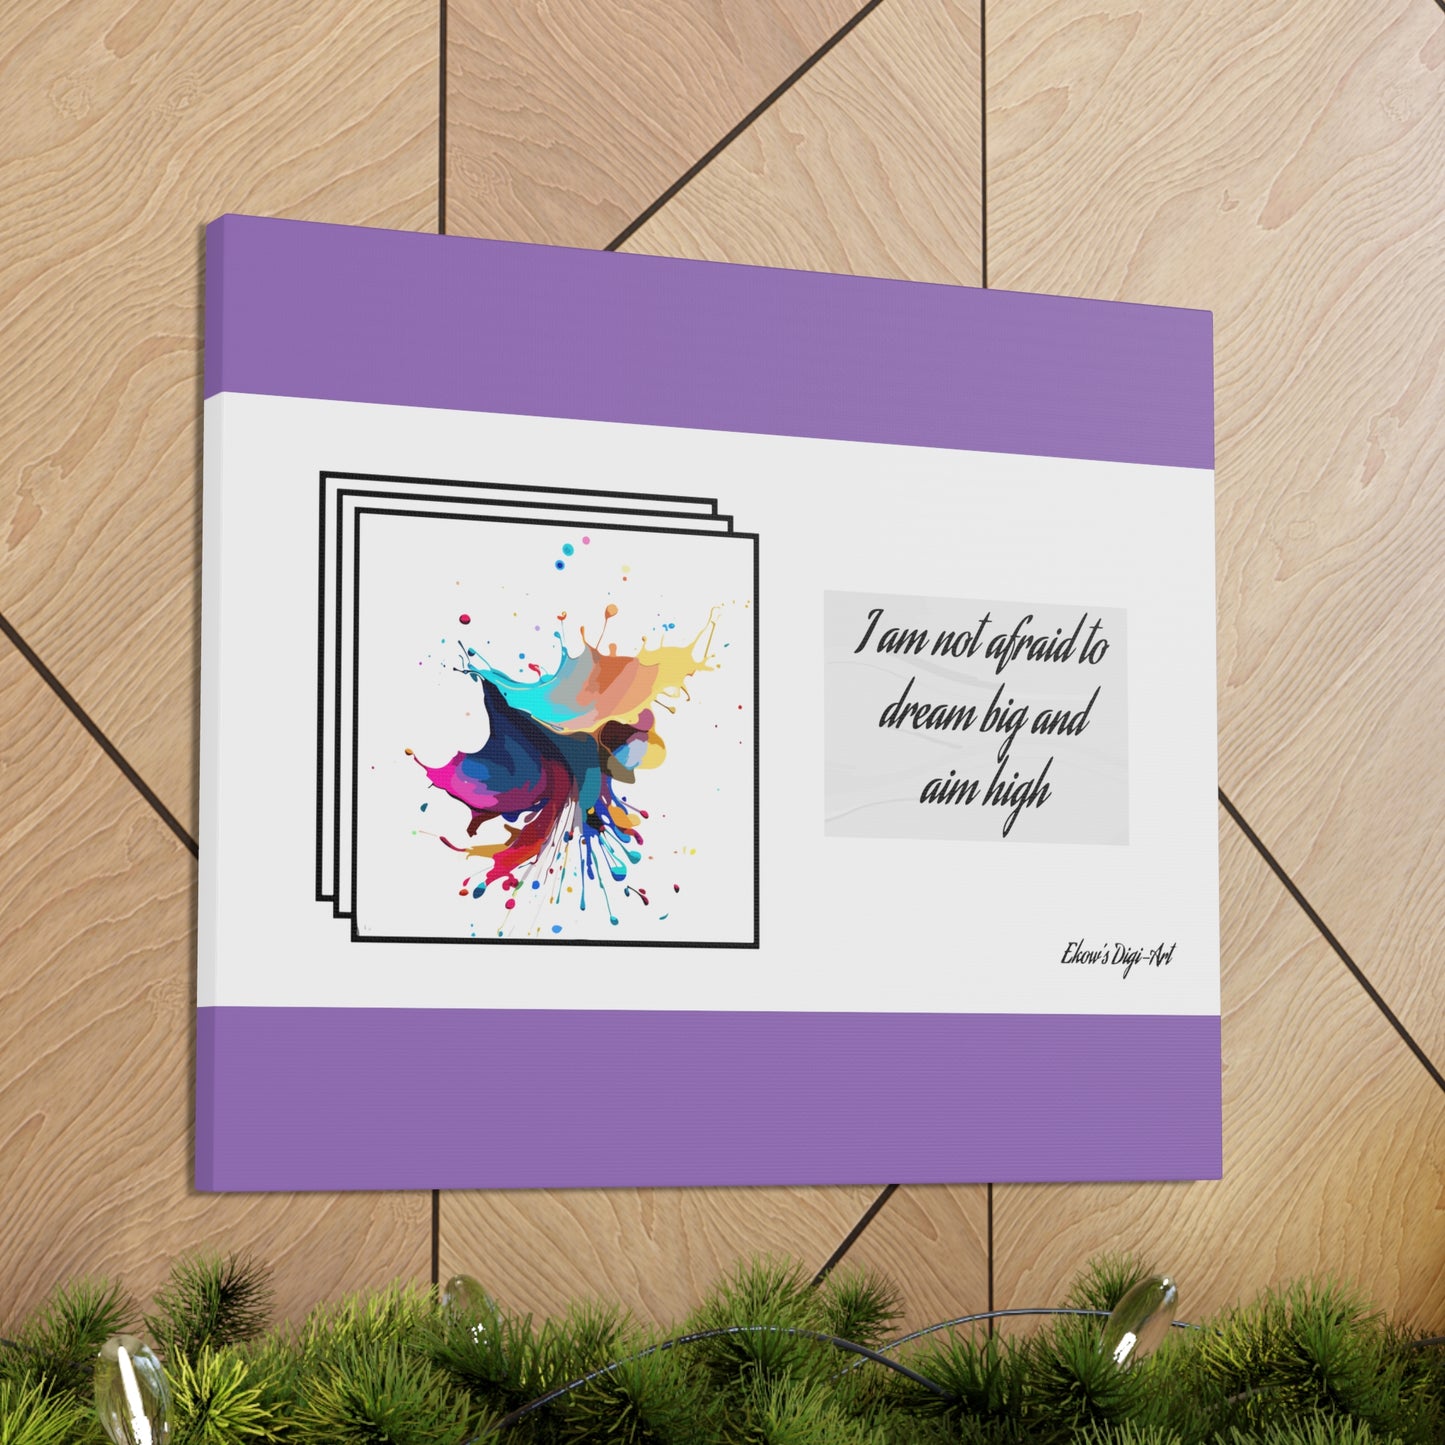 Bastion of Bliss - Affirmation Wall Art